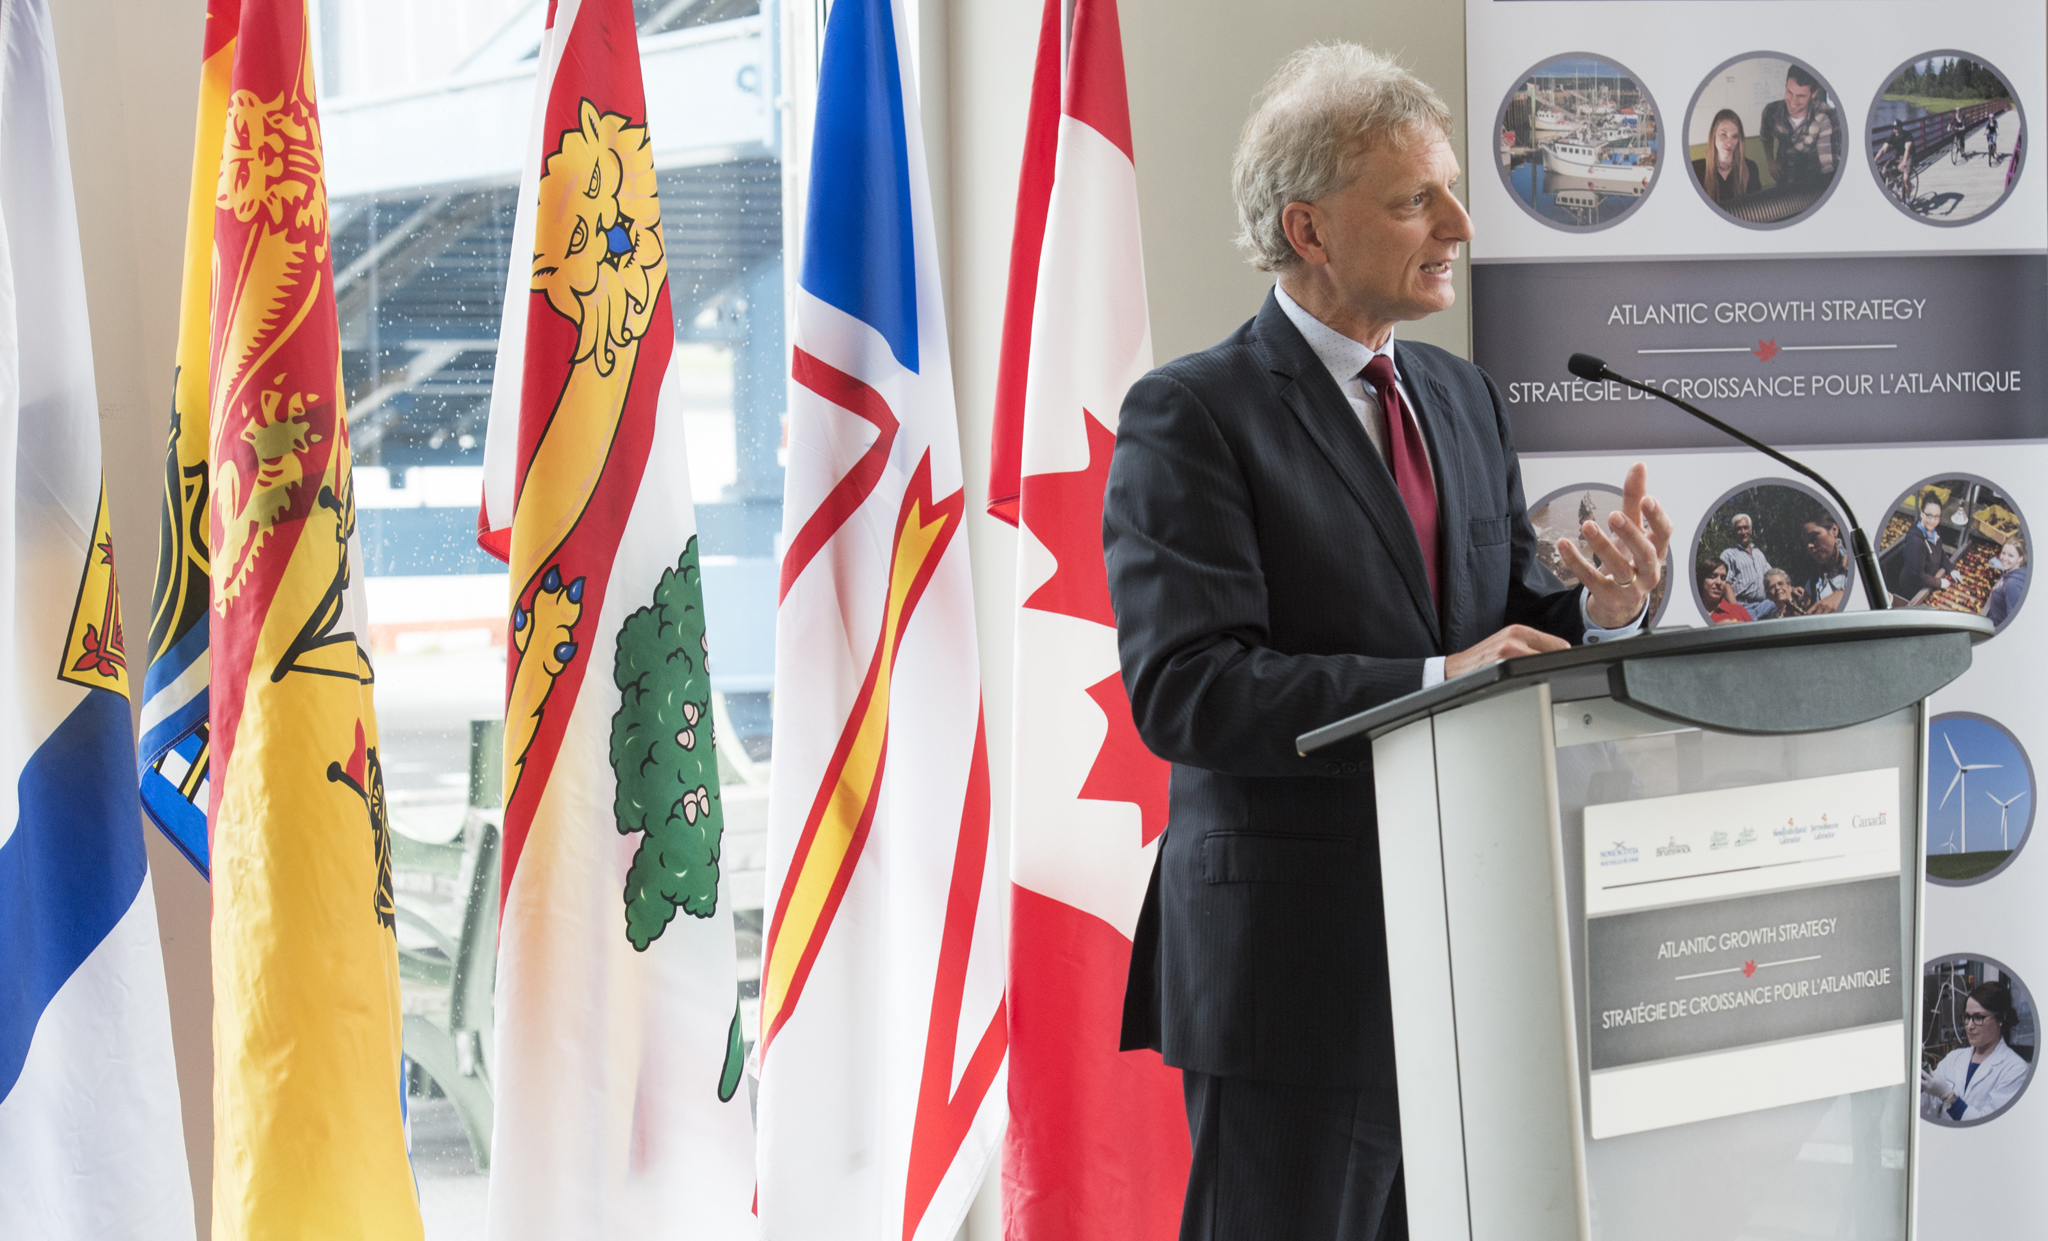 July 4, 2017 - The Honourable Roger Melanson, New Brunswick Treasury Board President and minister responsible for trade policy, speaks about how businesses will benefit from the new Atlantic Trade and Investment Growth Strategy.